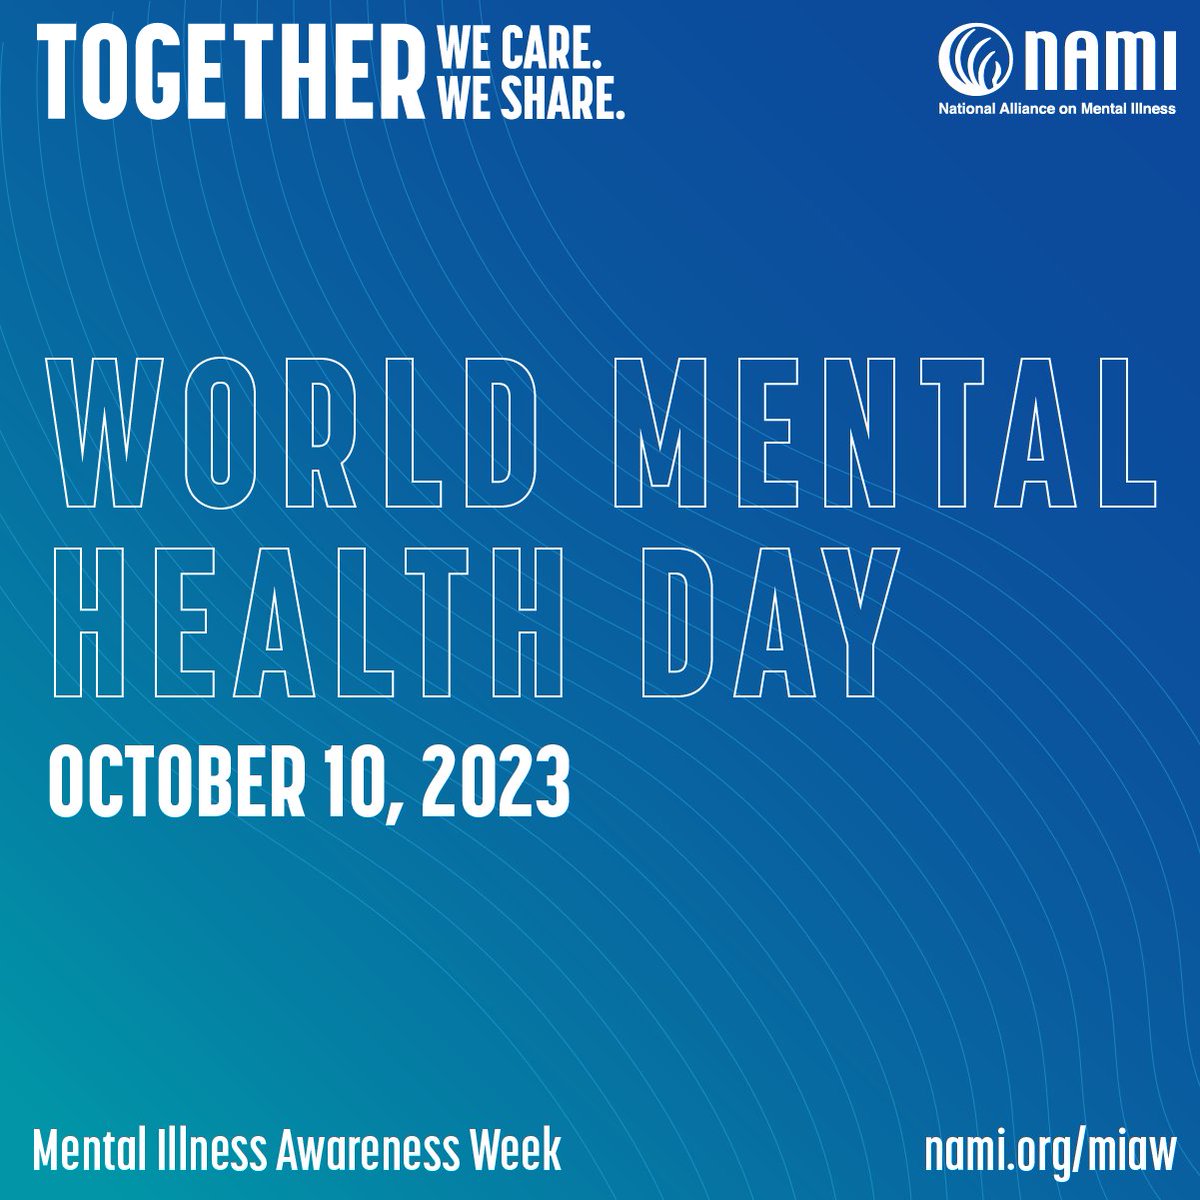 On #WorldMentalHealthDay, we would like to remind everyone that NAMI Mass believes a person's mental health is synonymous with a person’s overall health. Let's talk openly about mental health to create a world where everyone feels heard and valued.